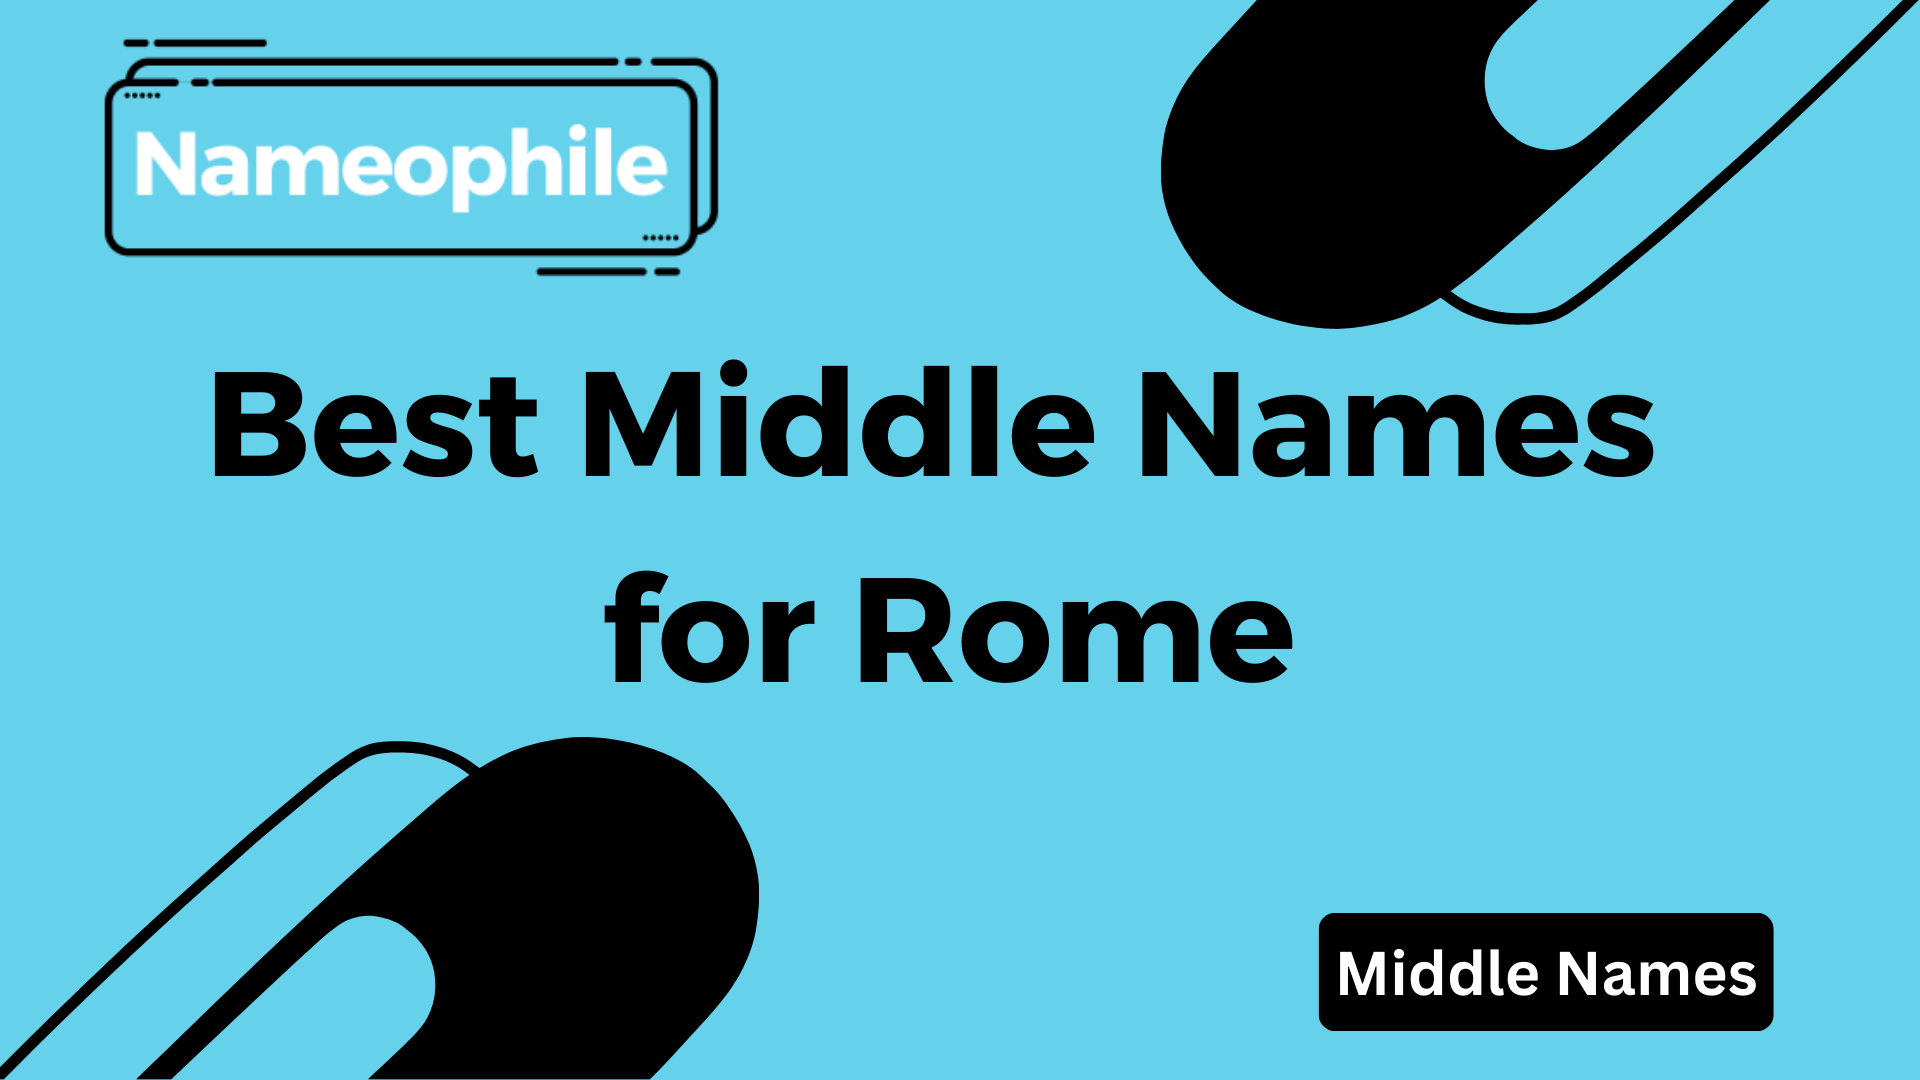 Best Middle Names for Rome (2)